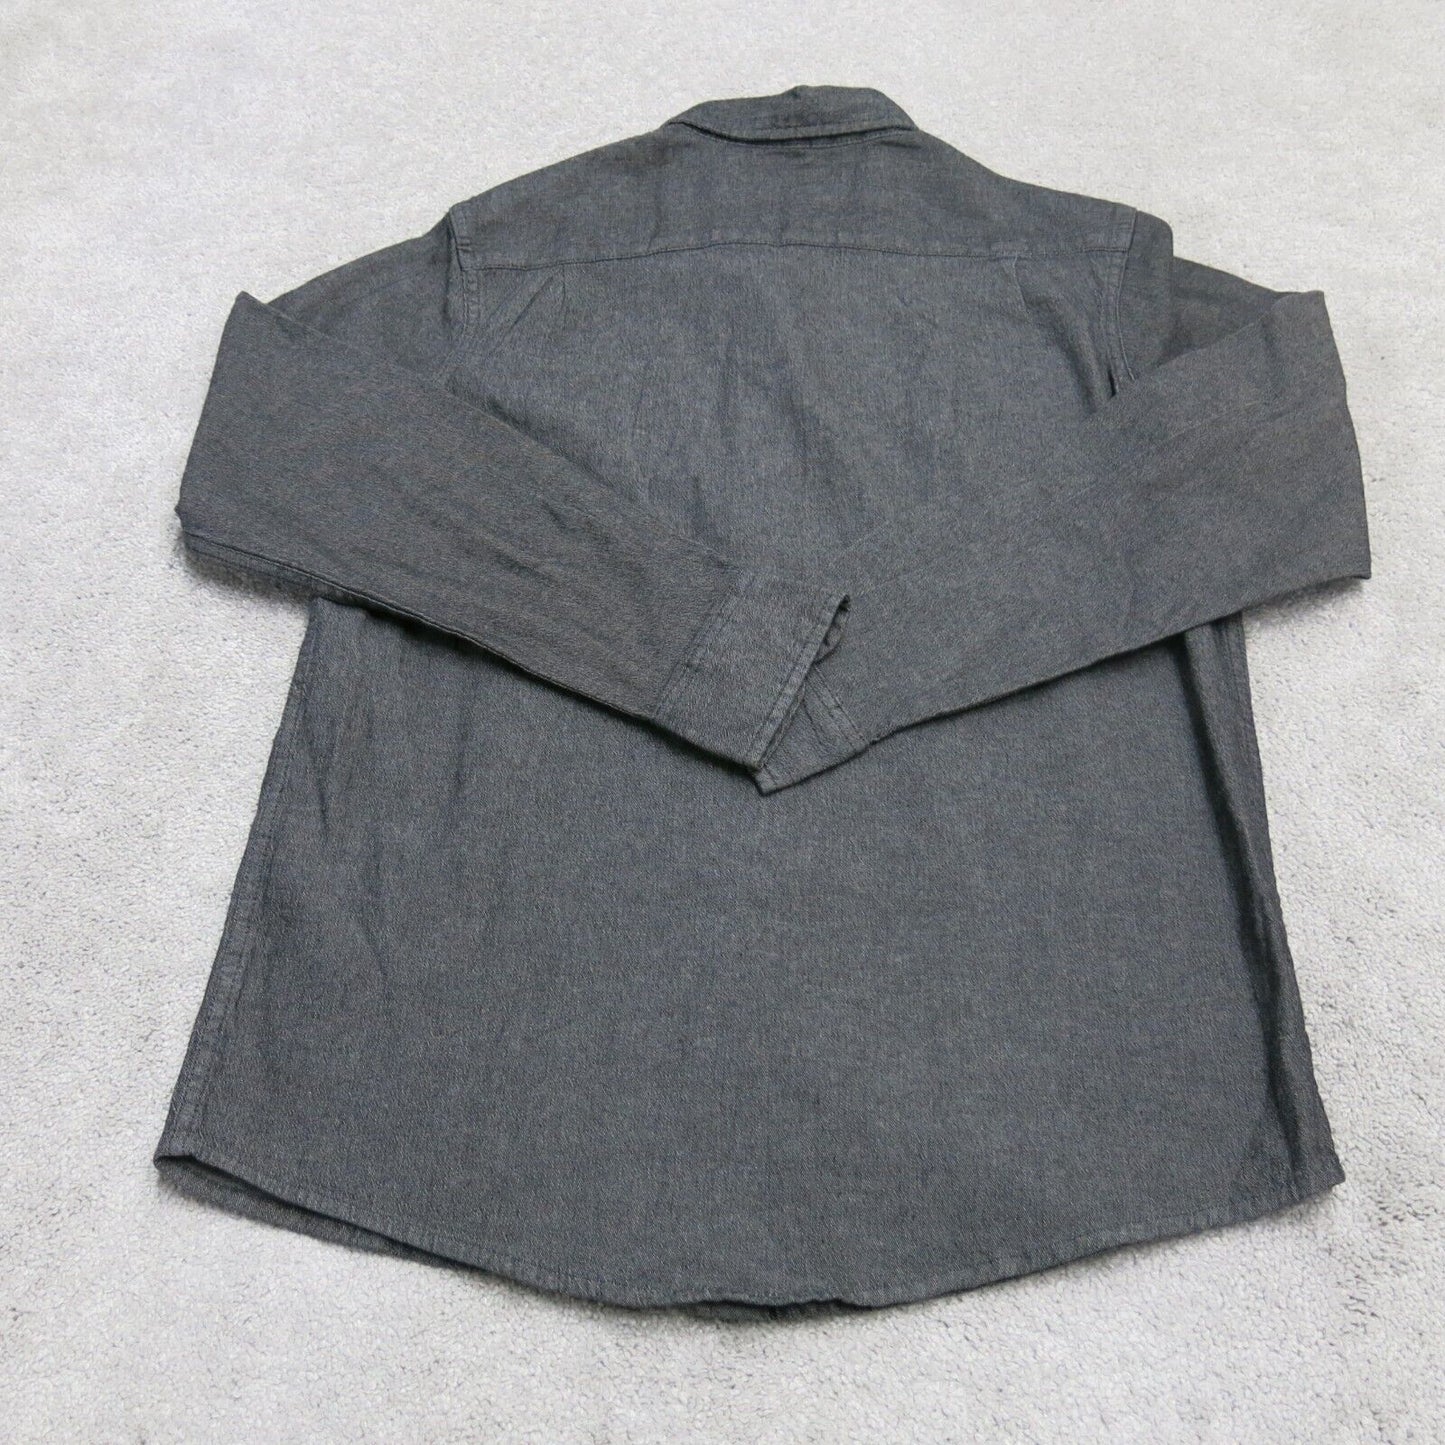 Wrangler Mens Button Up Shirt Long Sleeves 100% Cotton Charcoal Black Size S/P